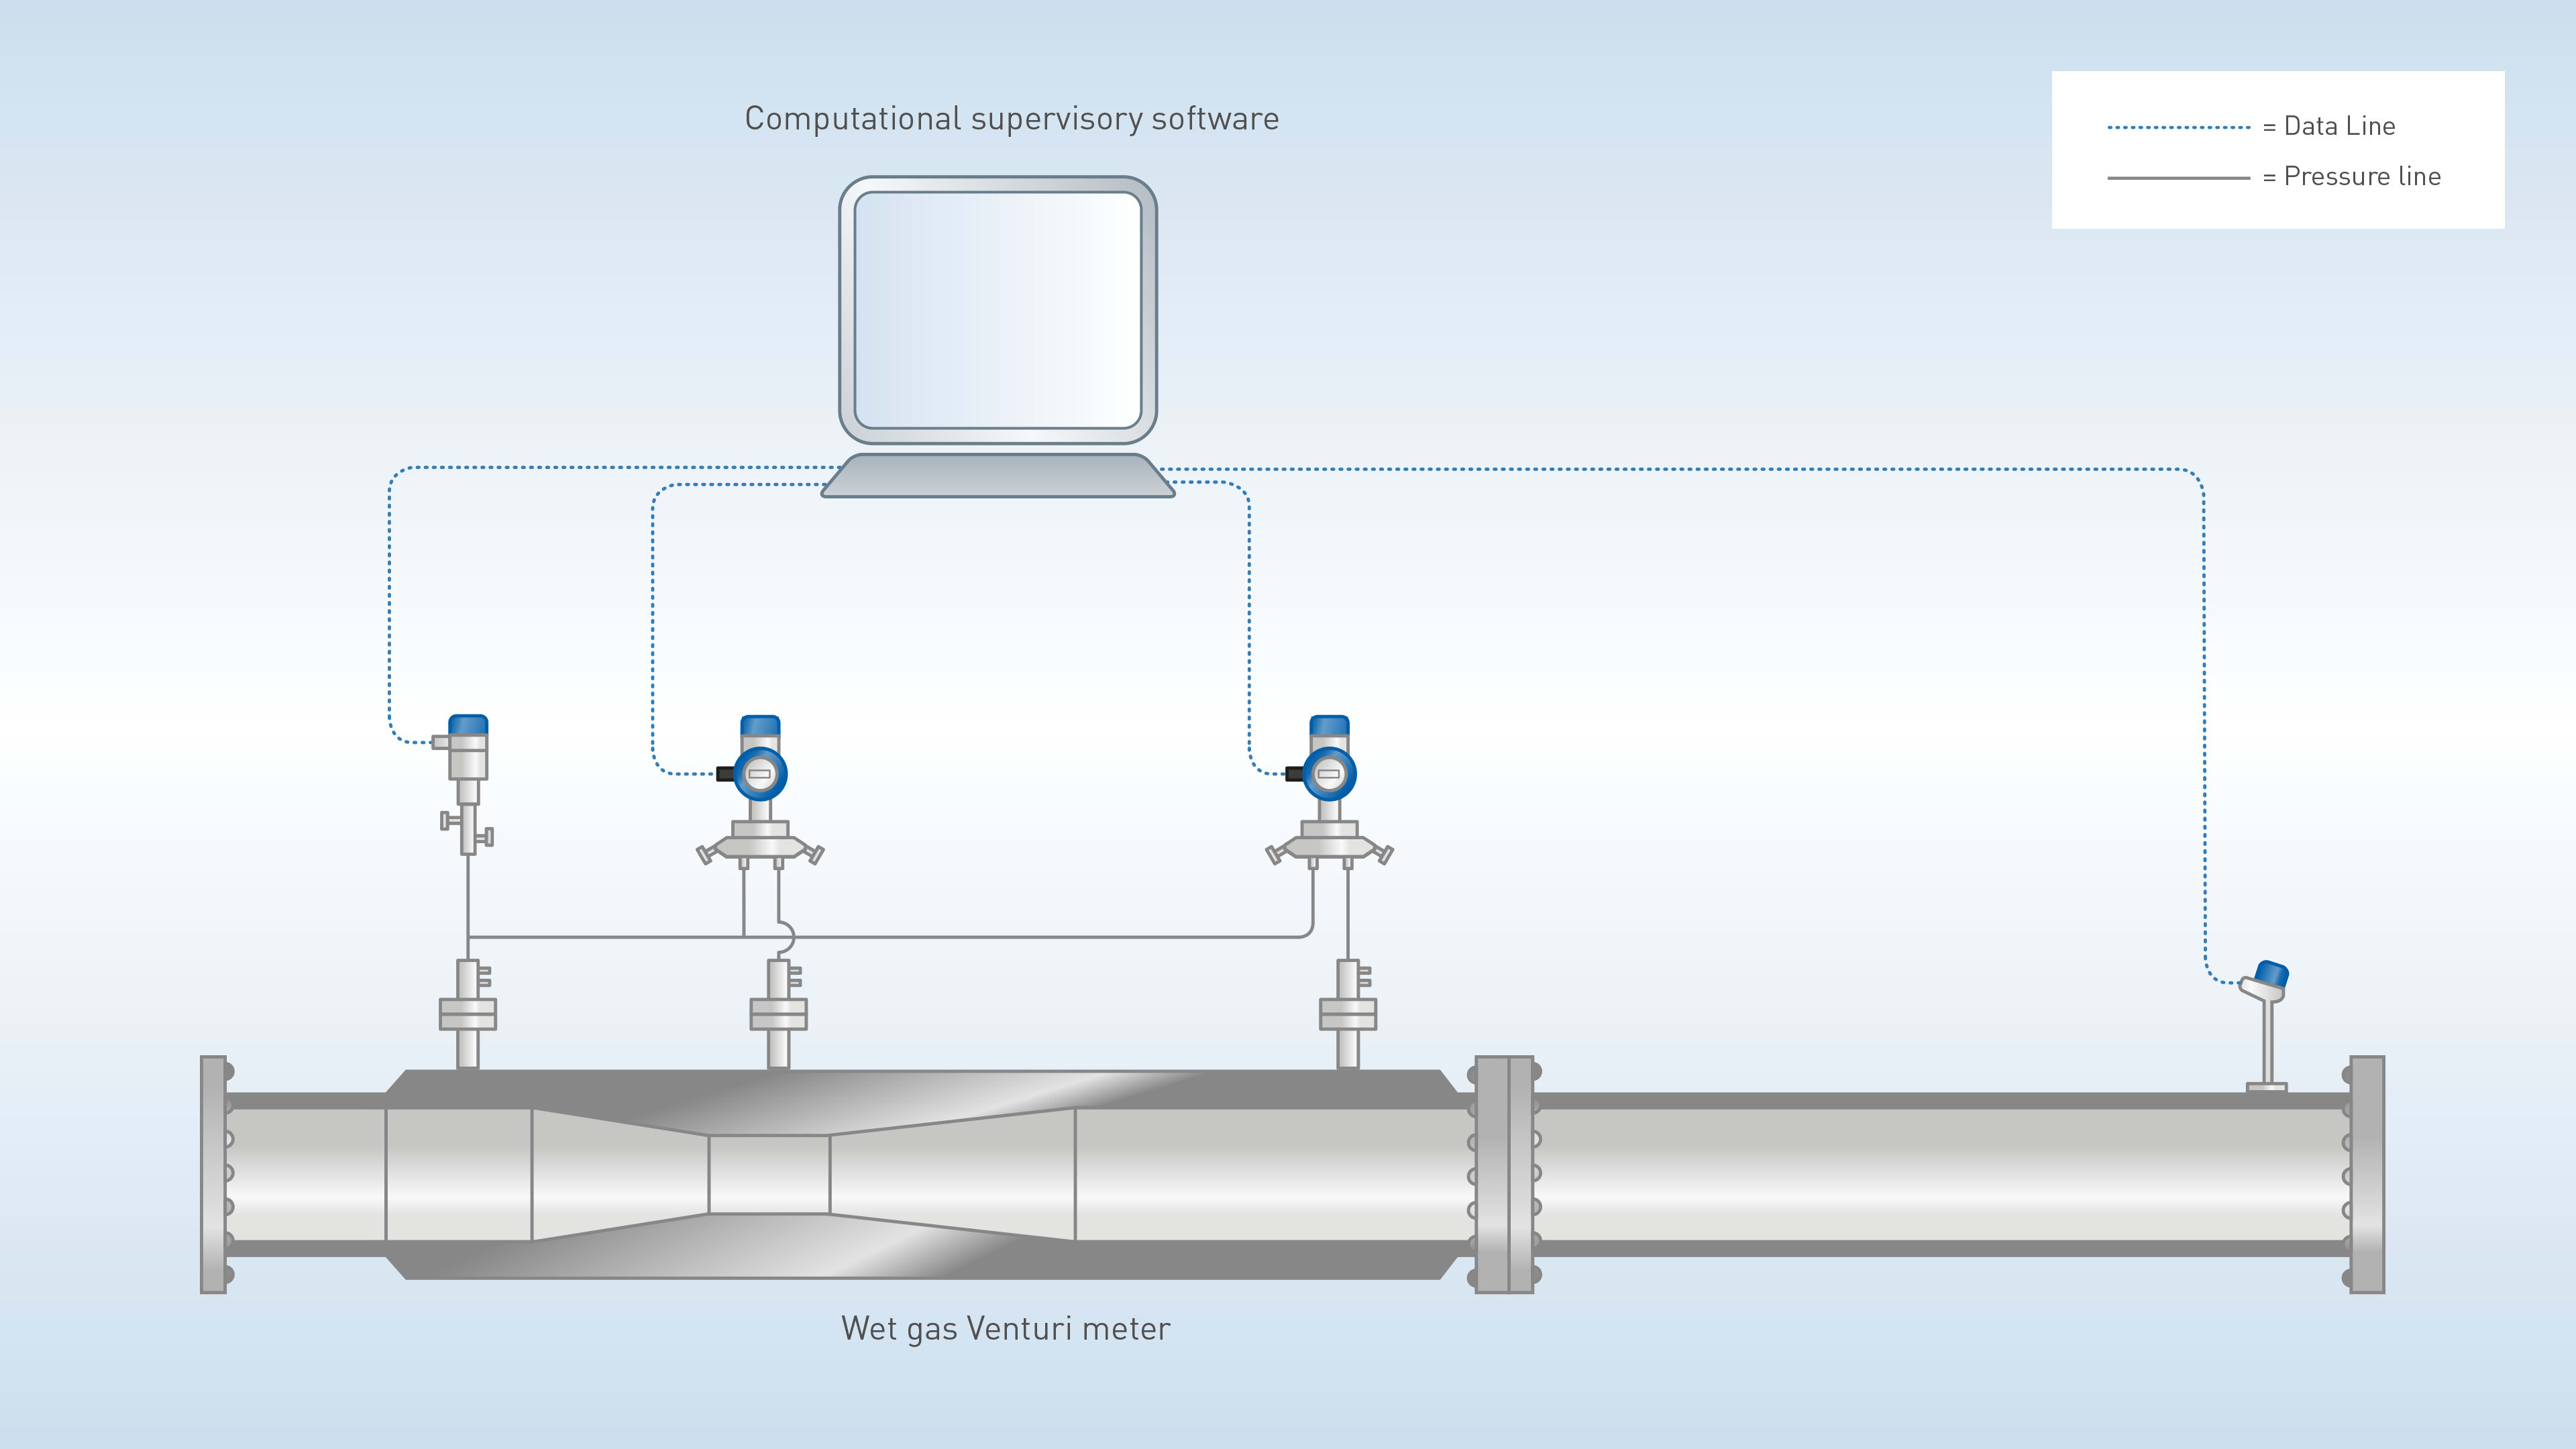 WGS 2000 wet gas system - Industry standard solution with Pressure Loss Ratio (PLR) for liquid fraction monitoring